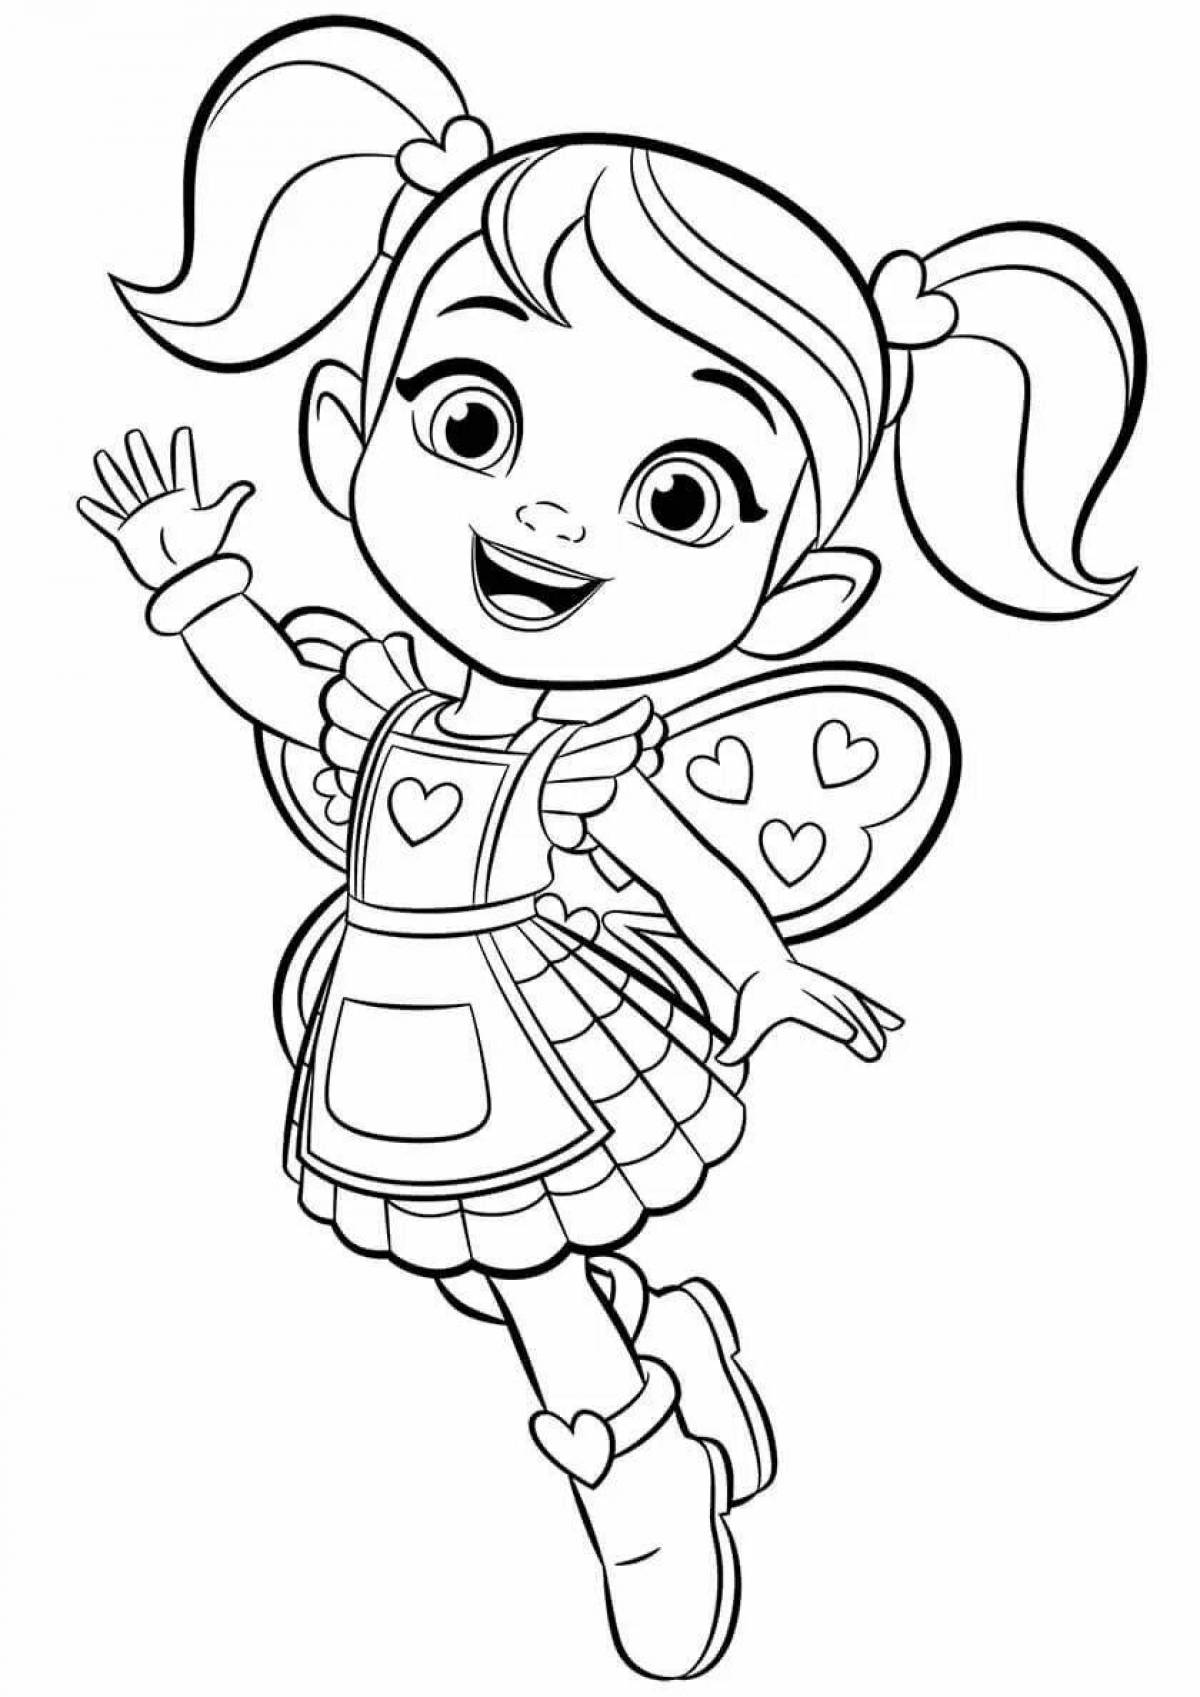 Exotic fairy coloring pages for kids